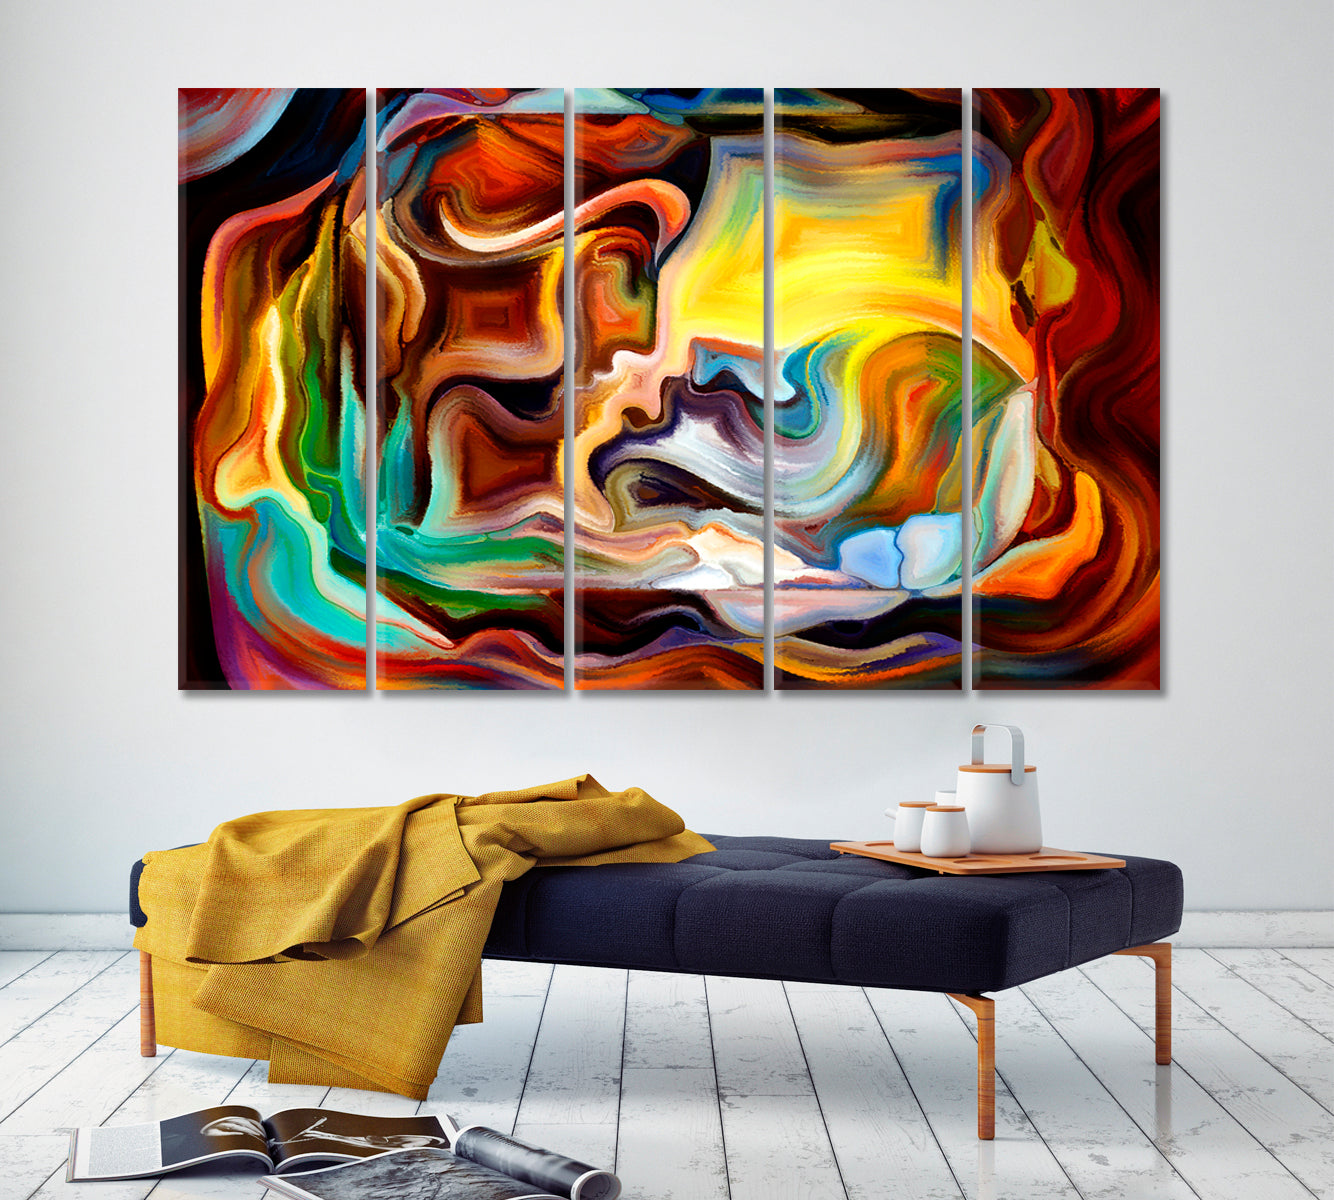 Human Love Nature Abstract Contemporary Consciousness Art Artesty 5 panels 36" x 24" 